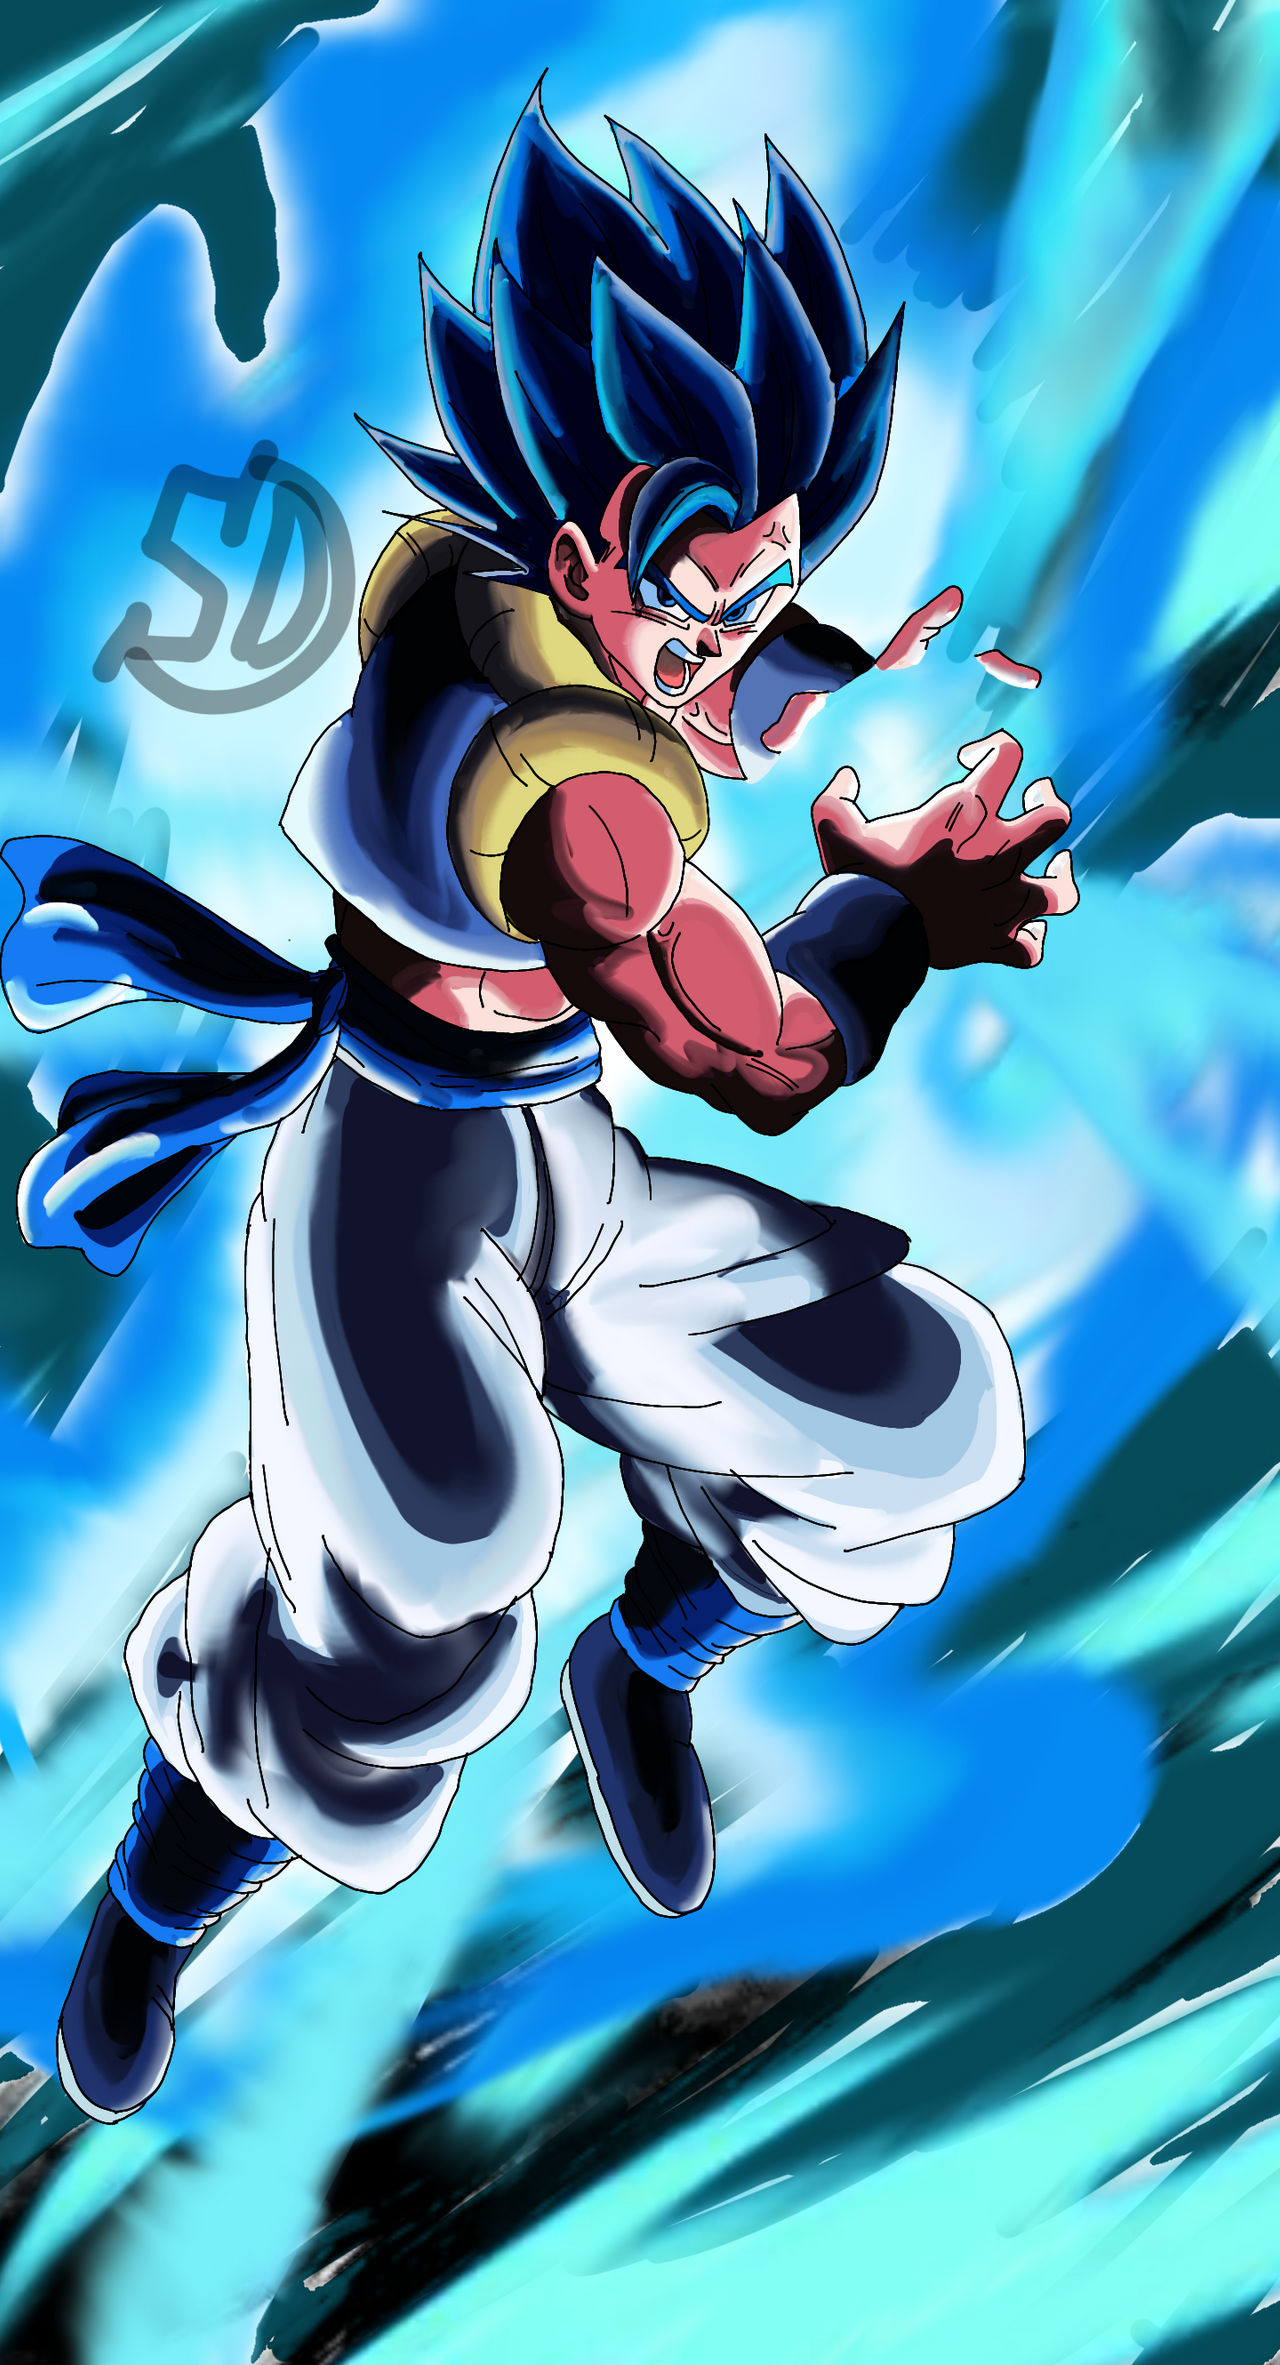 Gogeta Blue In Dragon Ball Legends Style. Let me know how is it